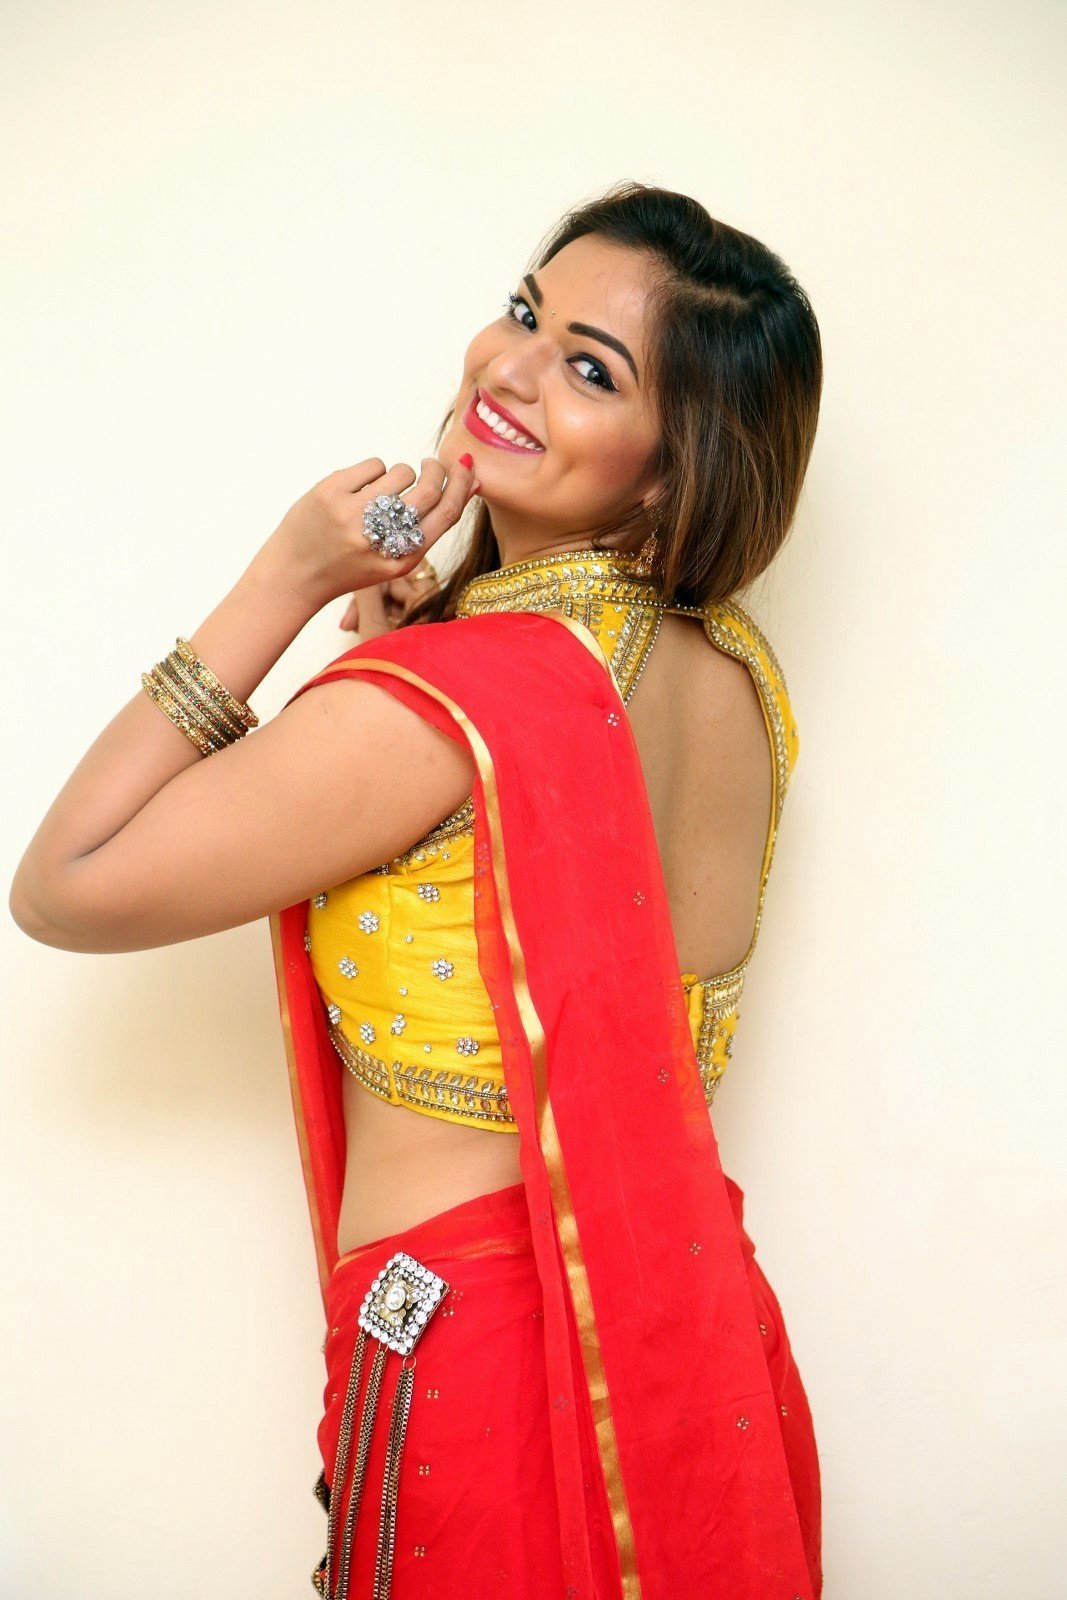 Aswini Hot in Red Saree Photos | Picture 1469862